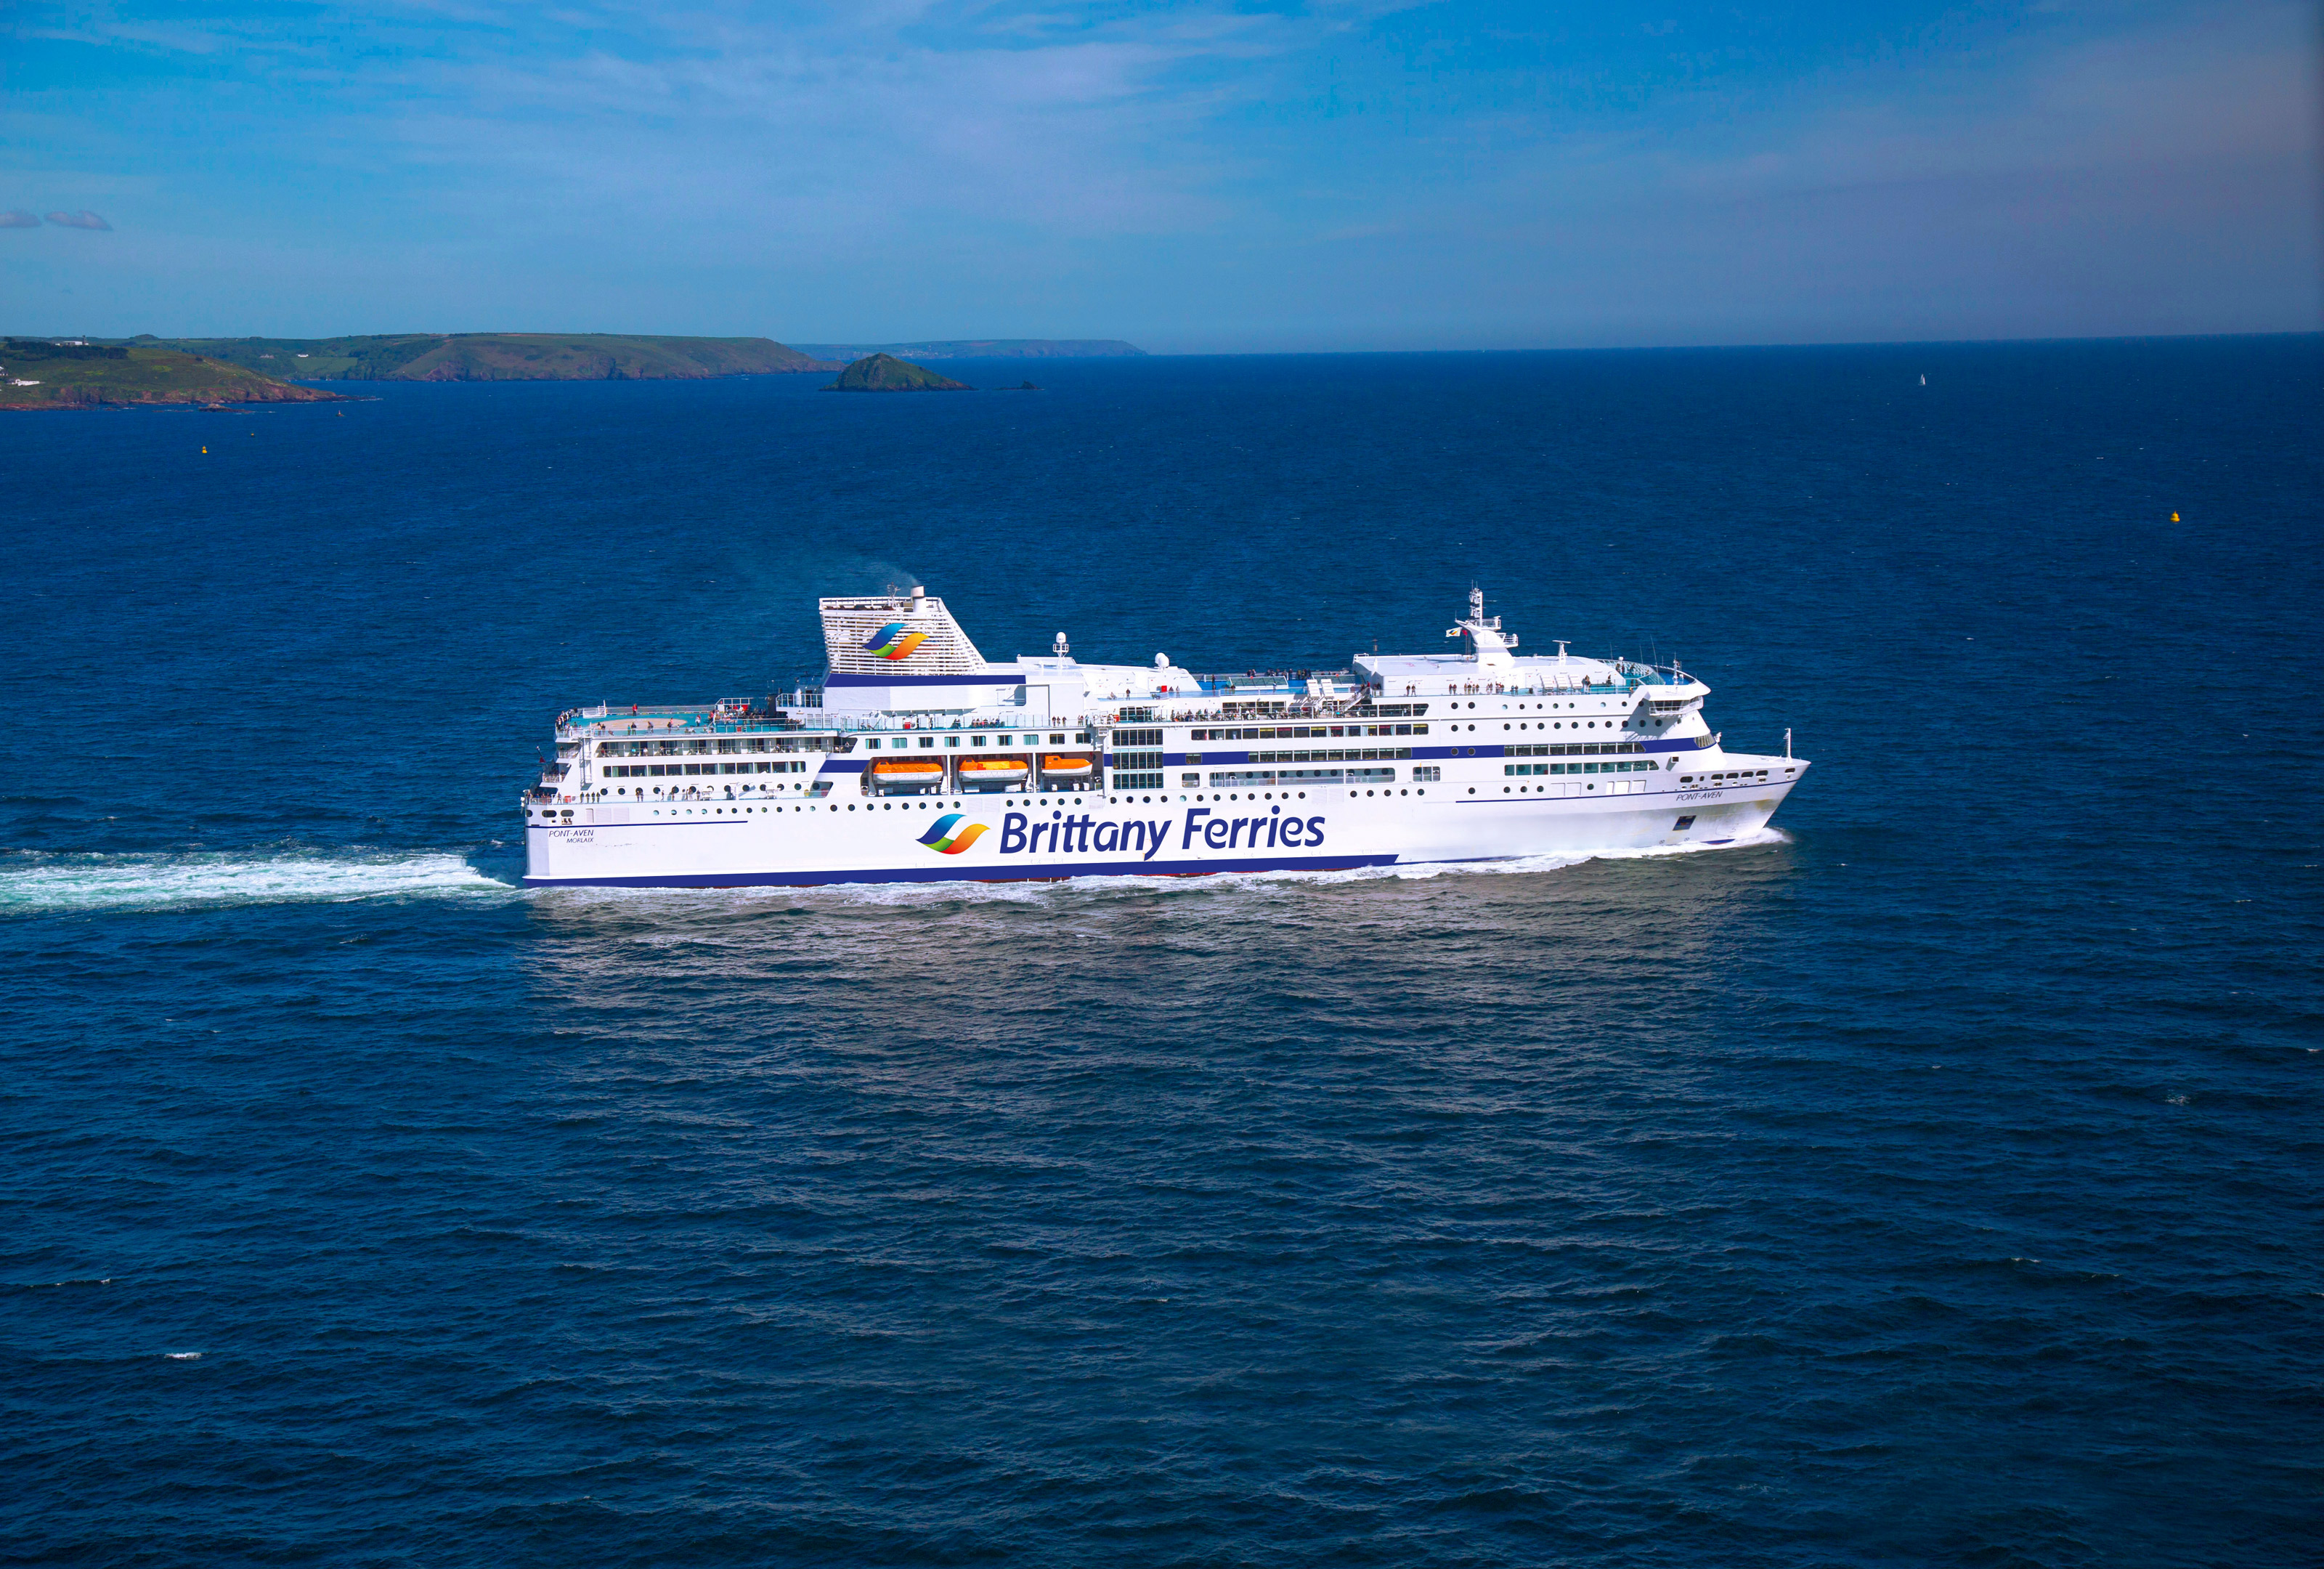 (c) Brittany-ferries.co.uk